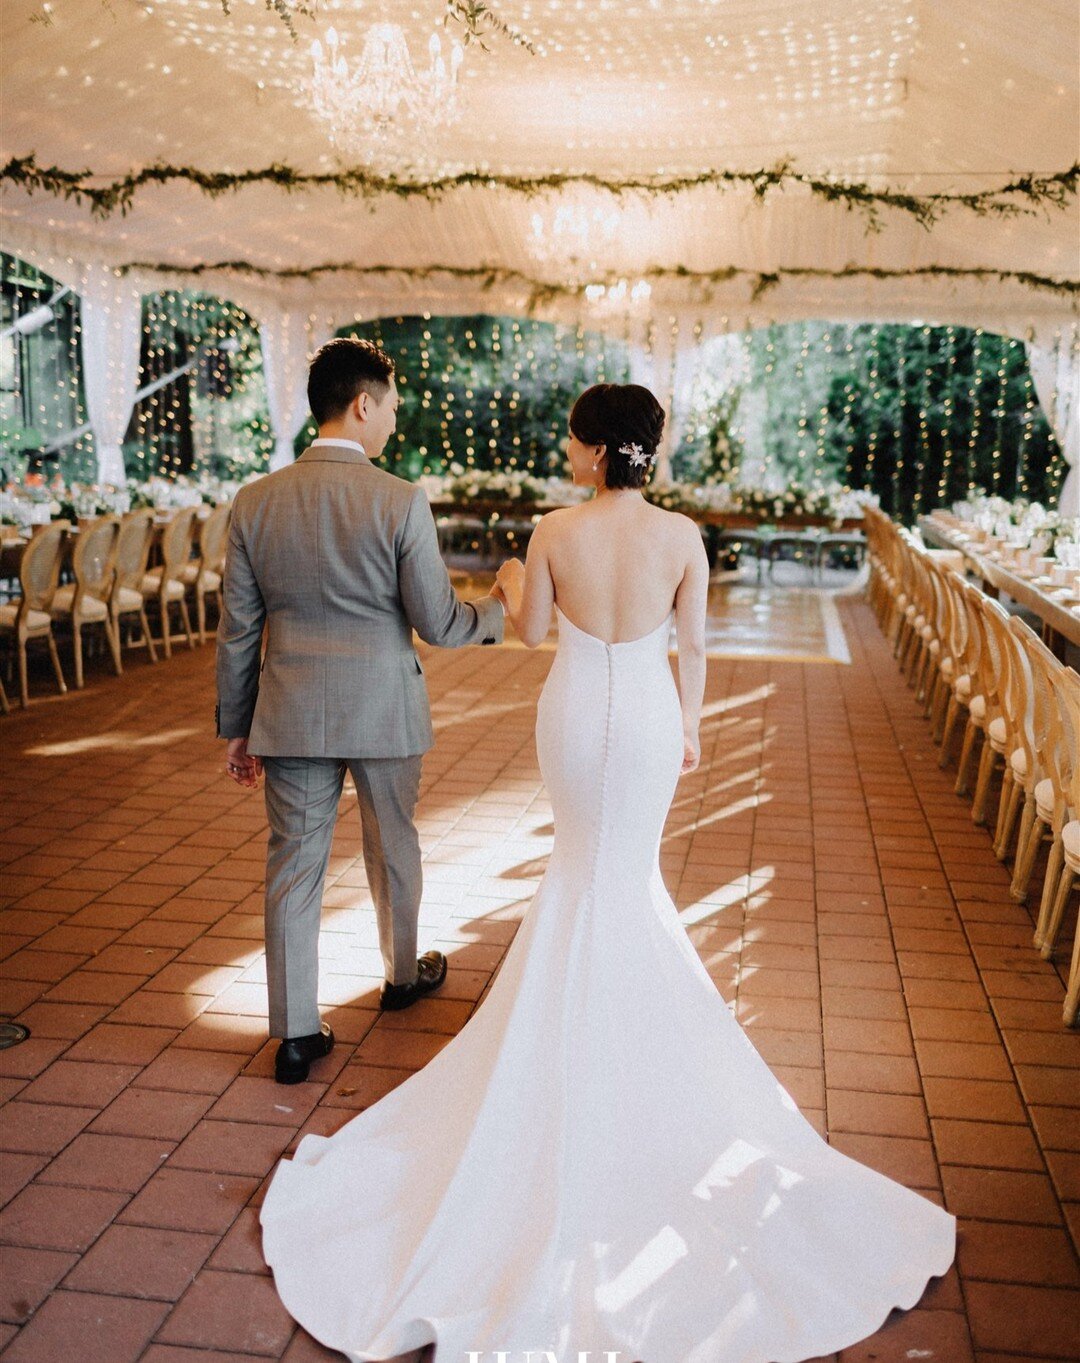 Celebrating love in our enchanting beachfront heritage home venue, Brockhouse✨

With its historic charm, lush gardens and ocean views, every moment is a fairytale in the making. We are grateful for this magical venue that sets the stage for many coup